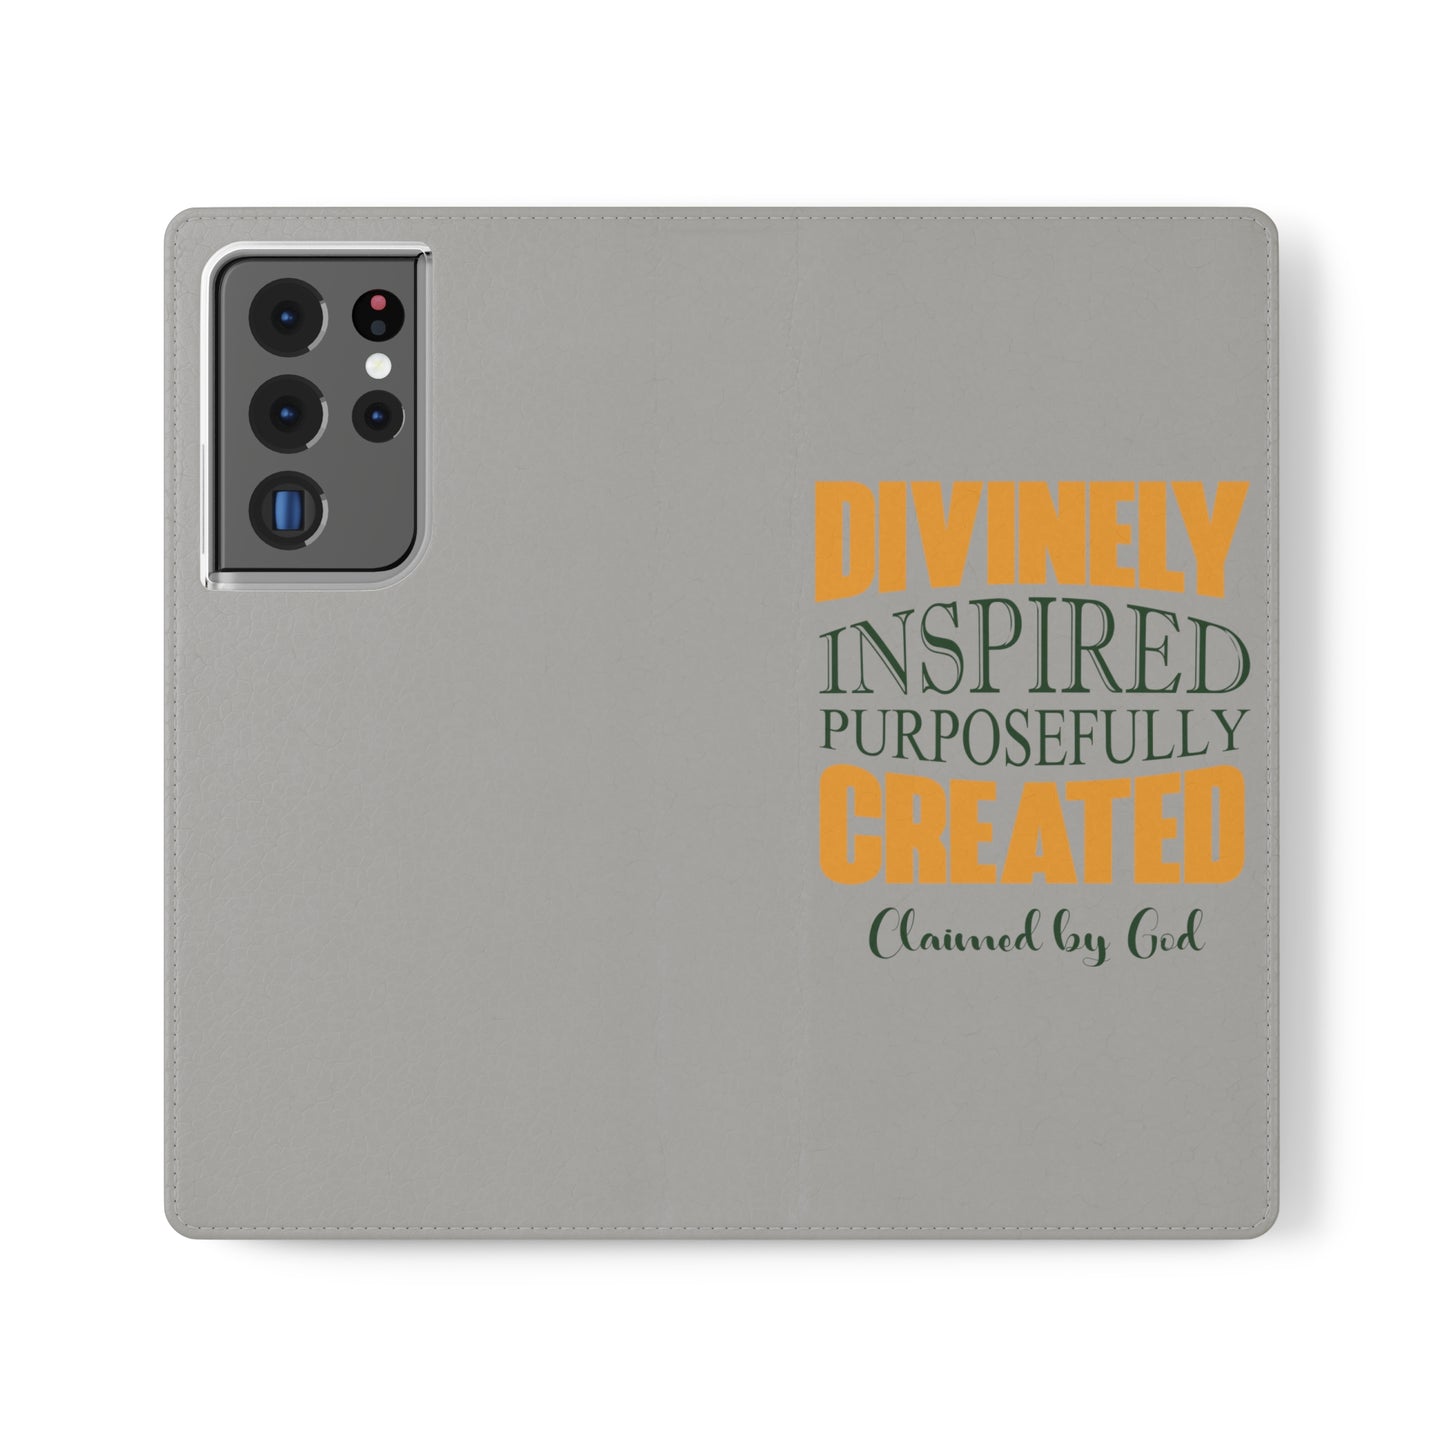 Divinely Inspired & Purposefully Created Phone Flip Cases